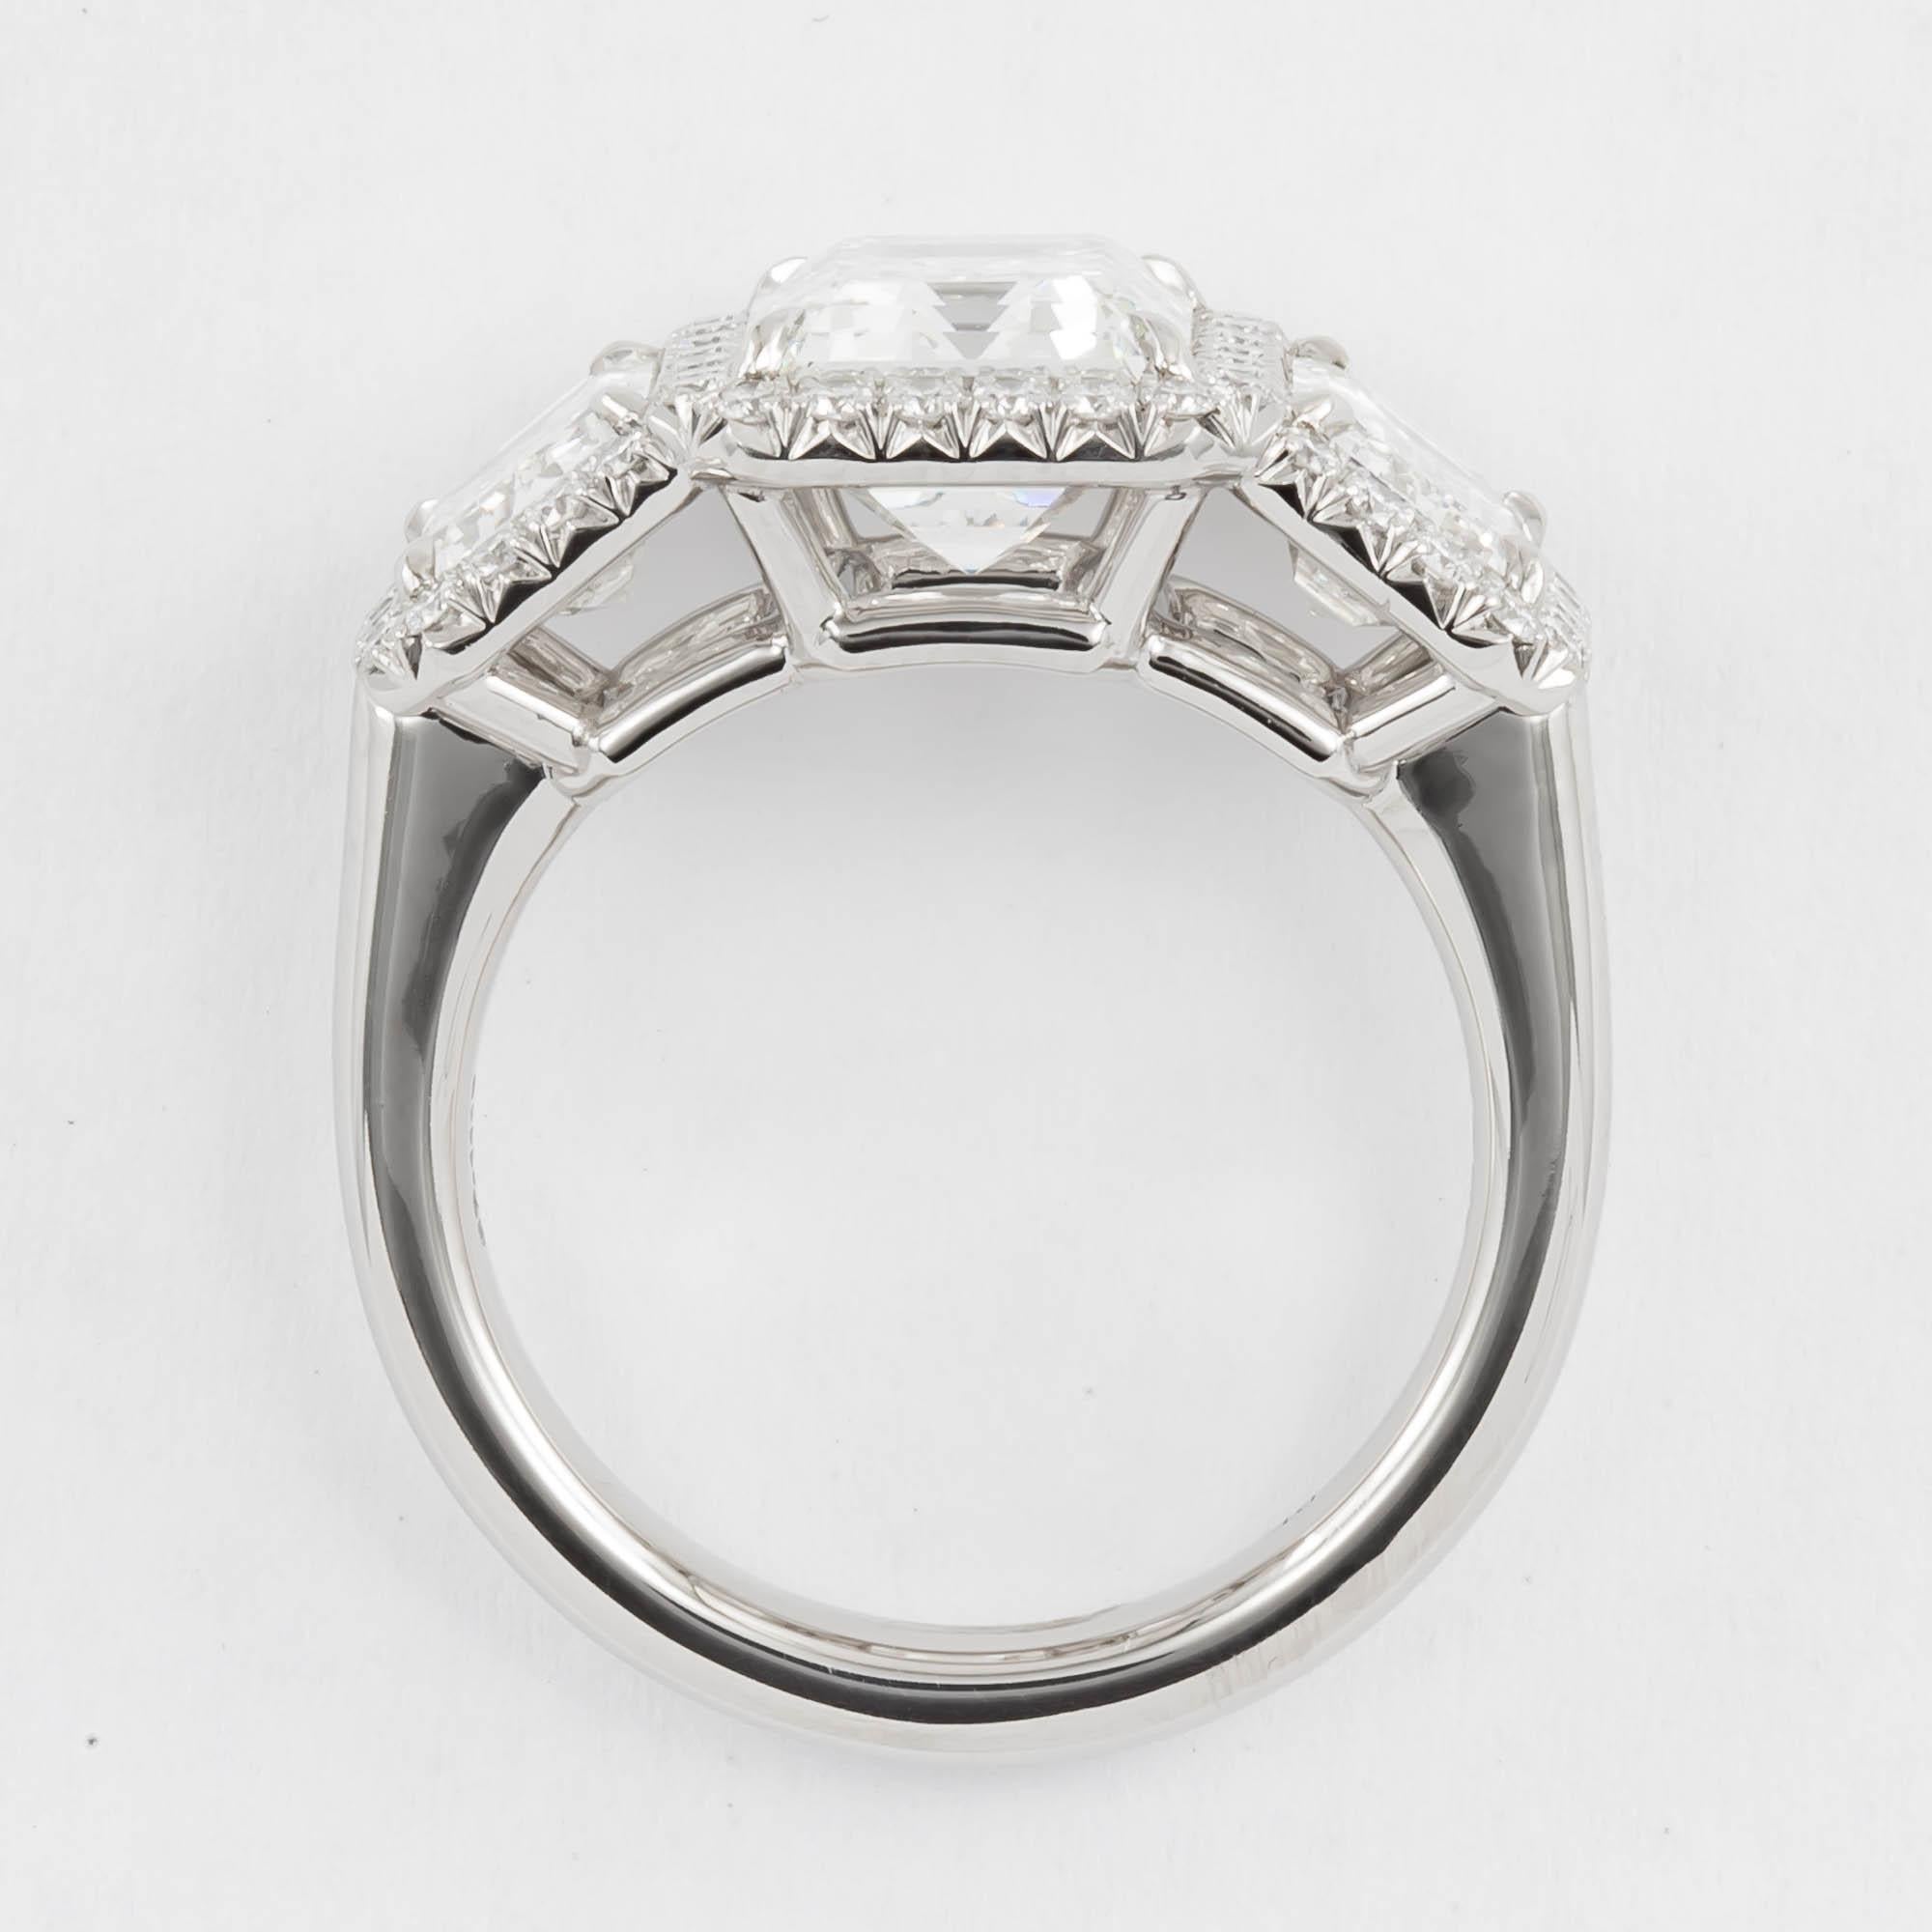 Platinum three Stone Emerald cut diamond Pave diamond ring. This ring features an emerald cut diamond, measuring 9.52x7.28x5.05 mm with a weight of 3.23 carat, G color, SI1 clarity, accompanied by GIA certificate #6187347011. flanked by a pair of